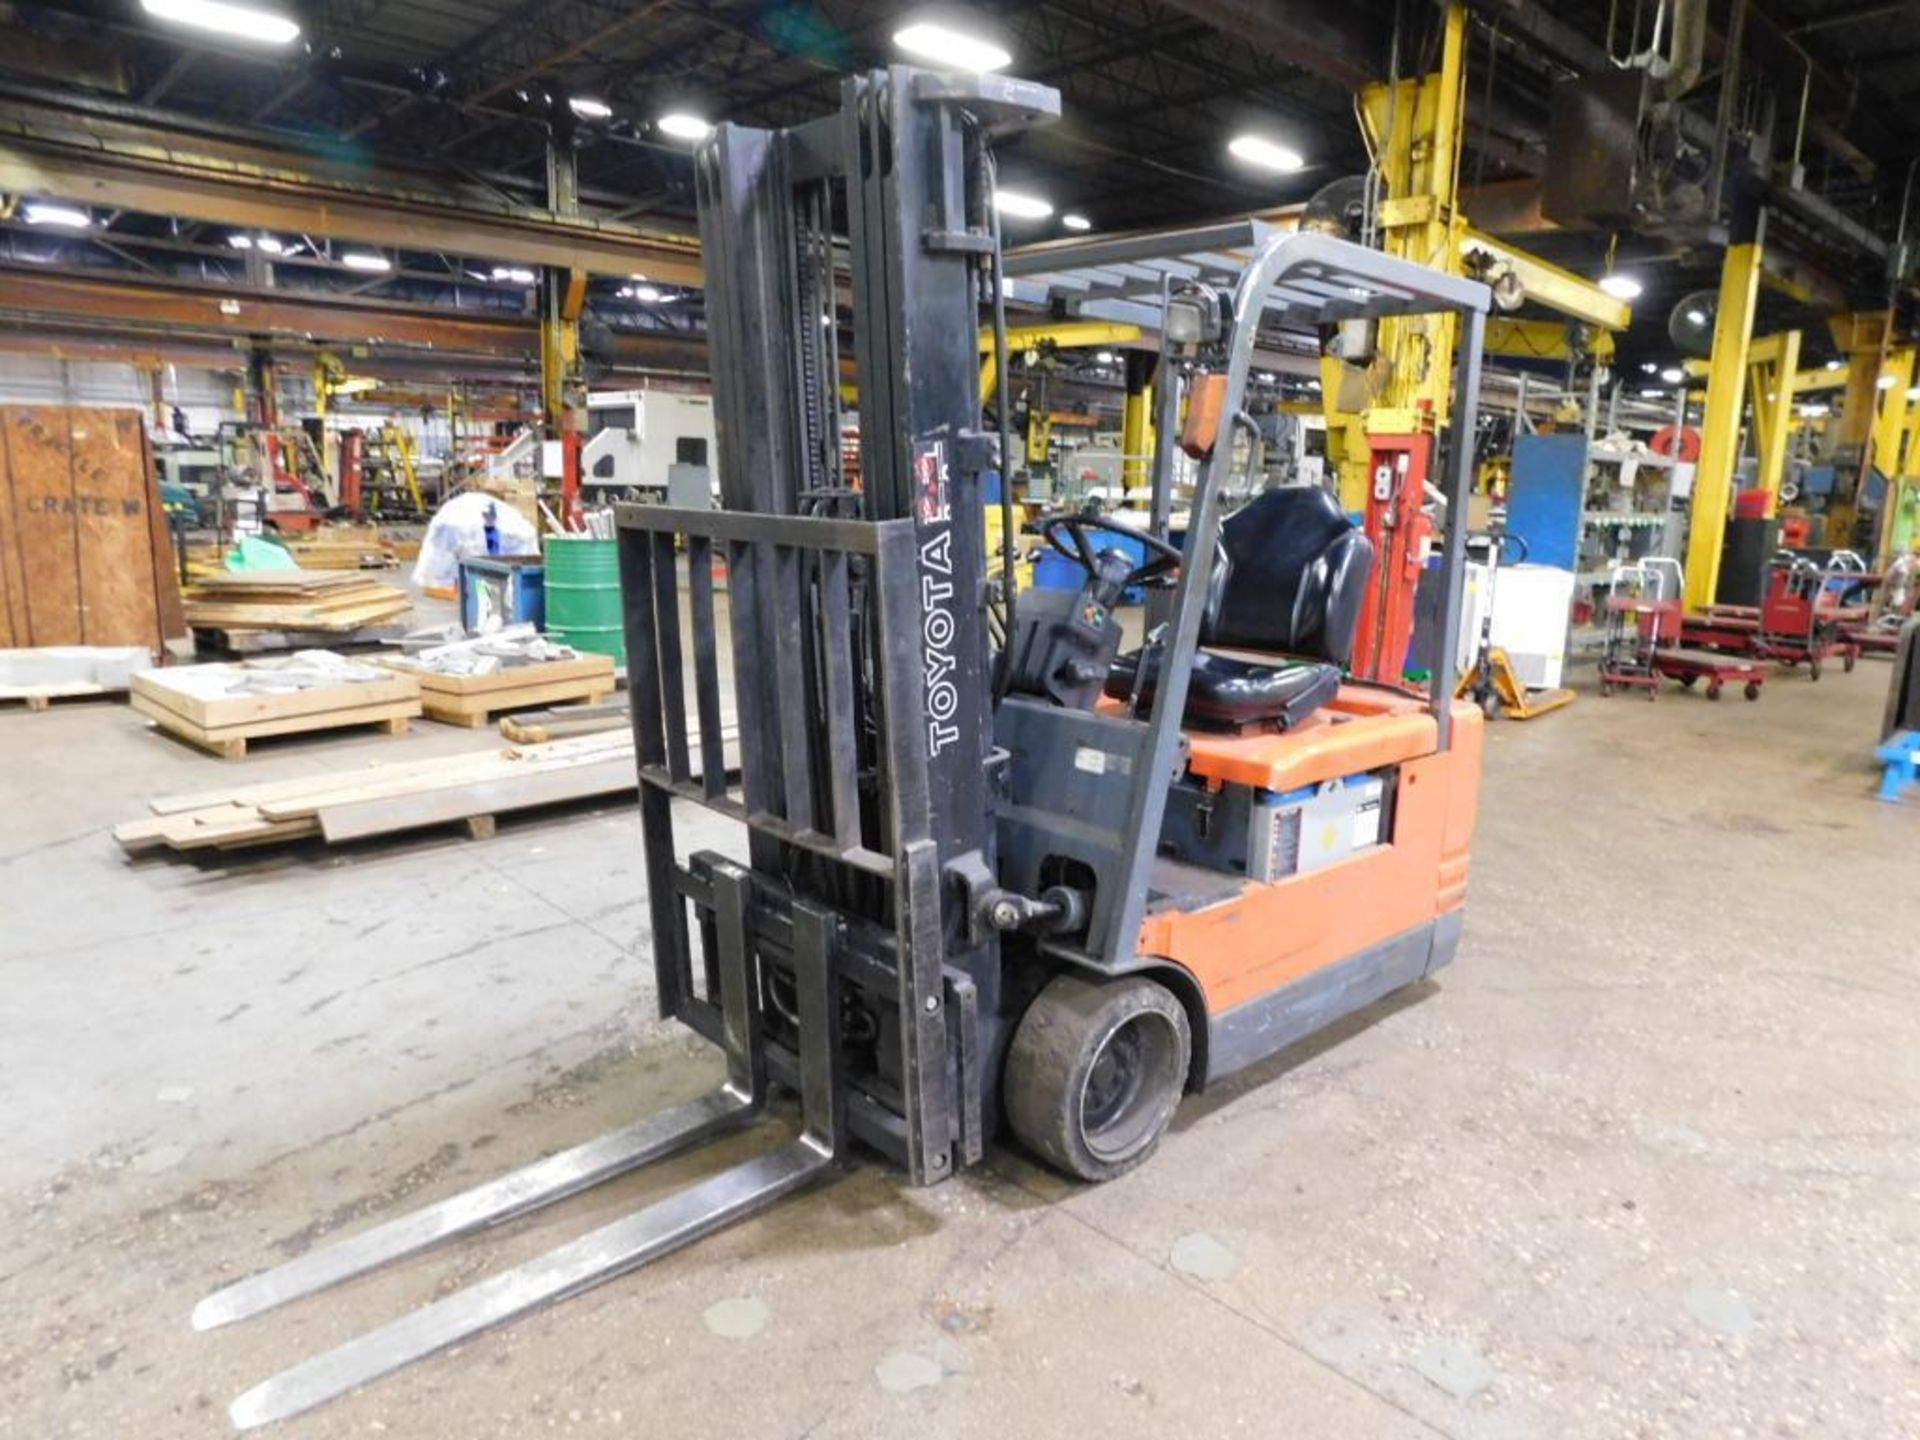 Toyota 3,450 Lb. Electric Forklift Model 5FBE20, S/N 10222, Solid Tires, 189" Max Lift Height, 3-Sta - Image 11 of 17